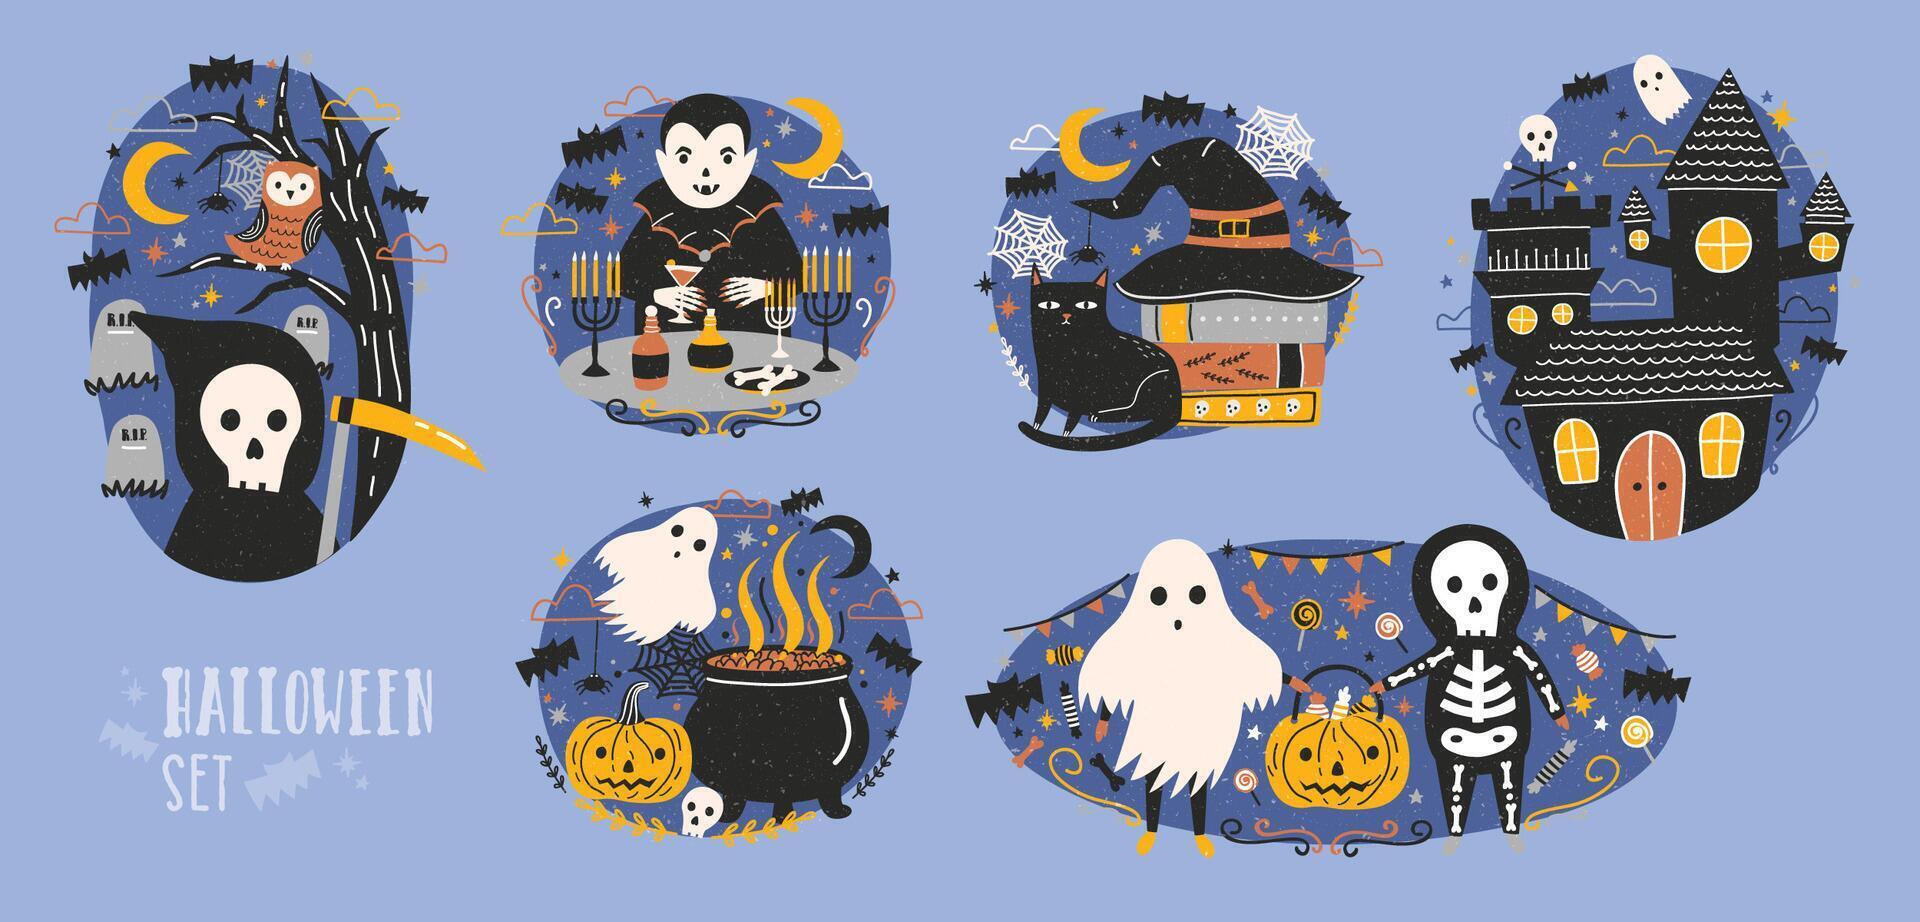 Collection of Halloween scenes with cute and funny fairy cartoon characters - grim reaper, vampire, ghost, Jack-o'-lantern or pumpkin lantern, owl, black cat. Flat colorful vector illustration.